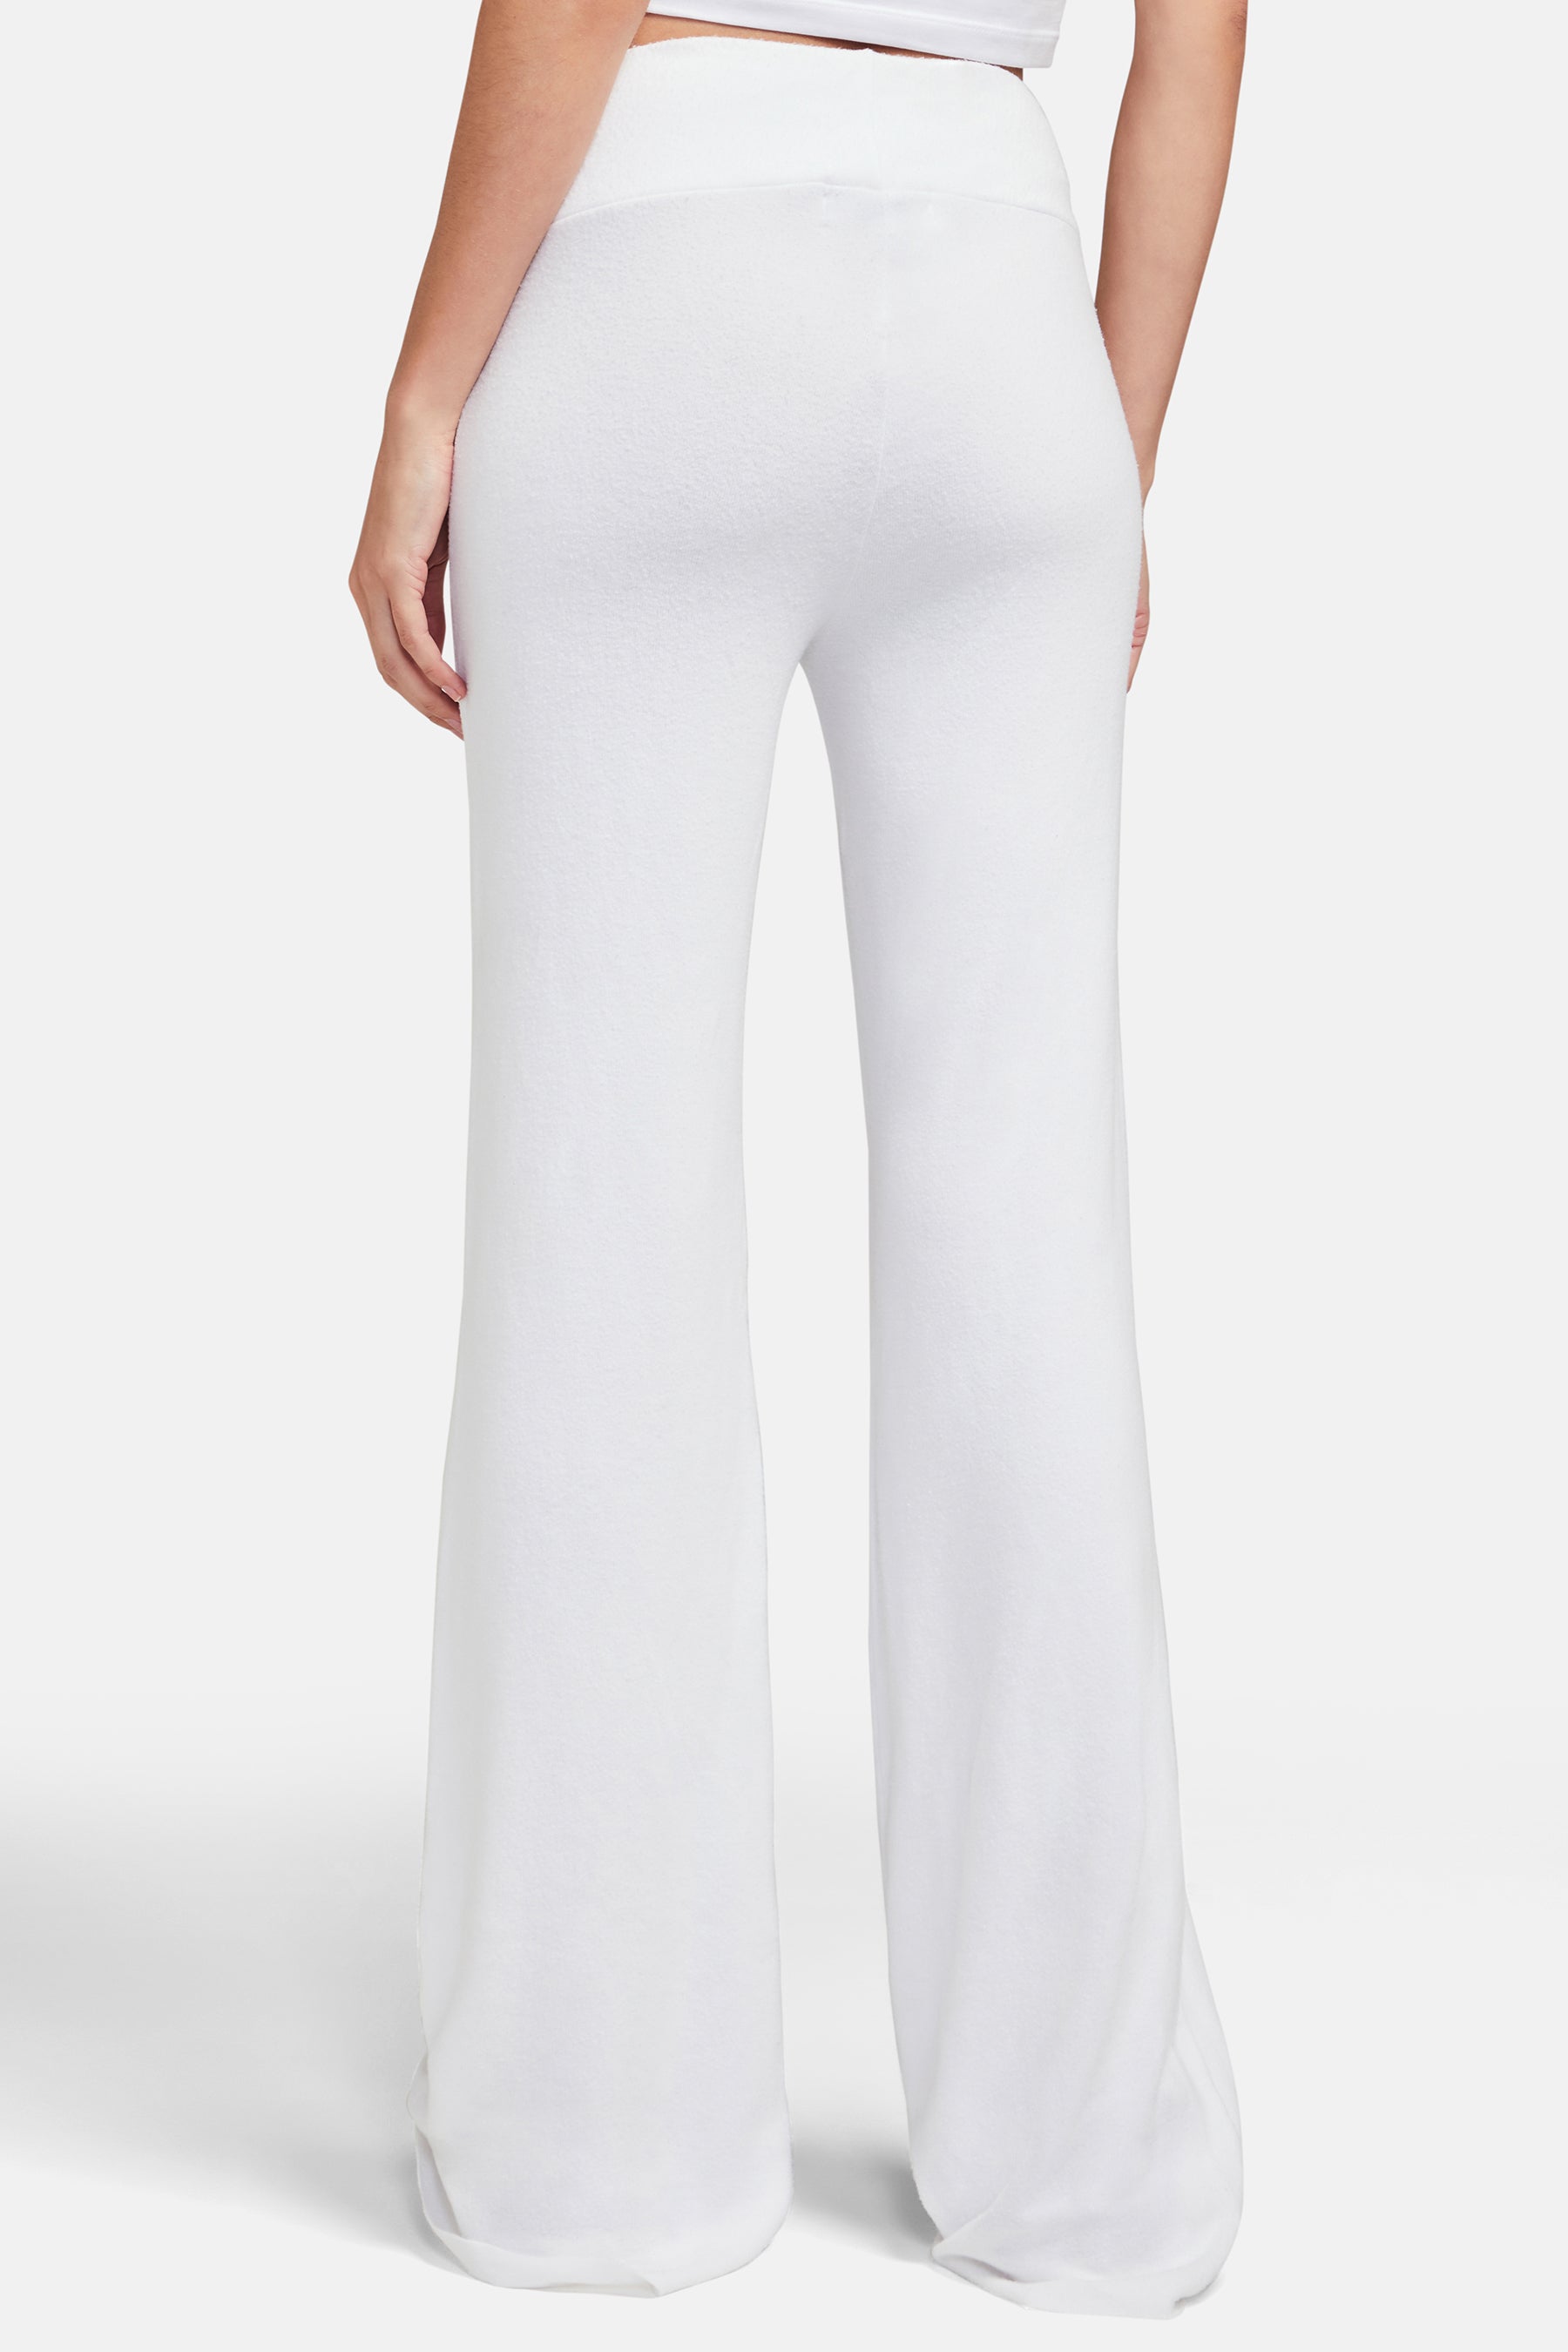 Women's Tennis Club Sweat Pants in Clean White – Wildfox Couture